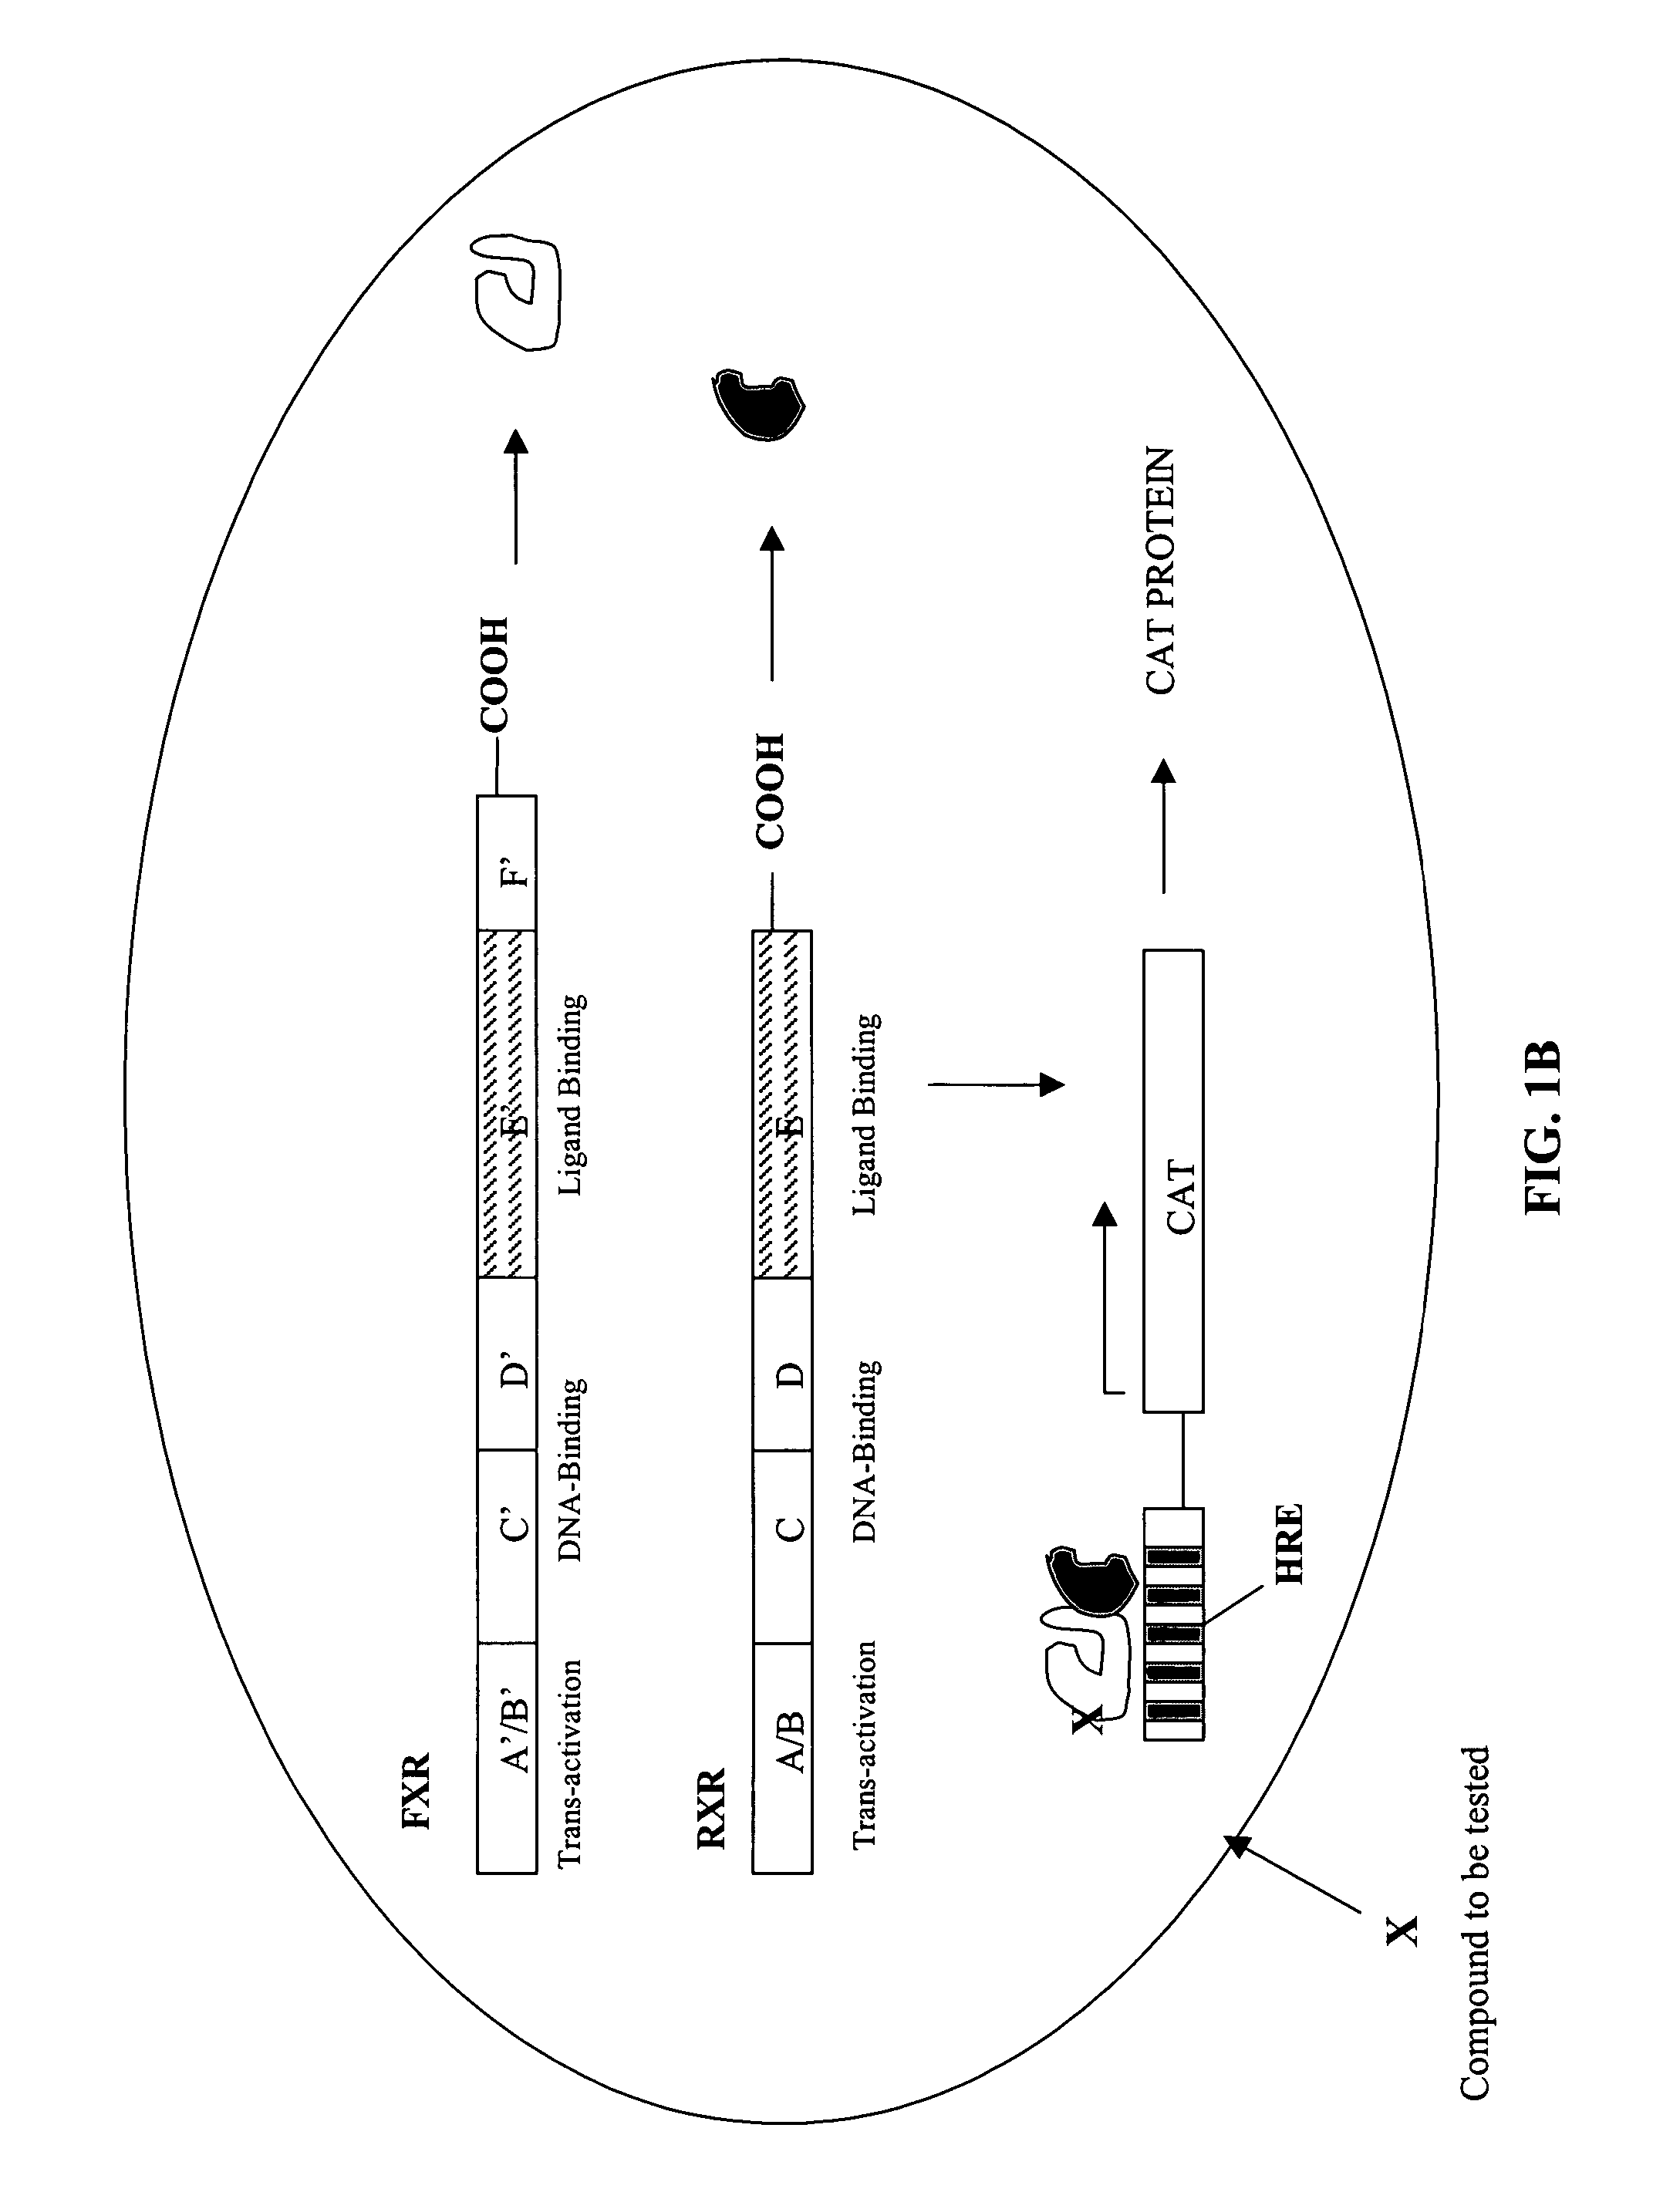 Compounds that act to modulate insect growth and methods and systems for identifying such compounds